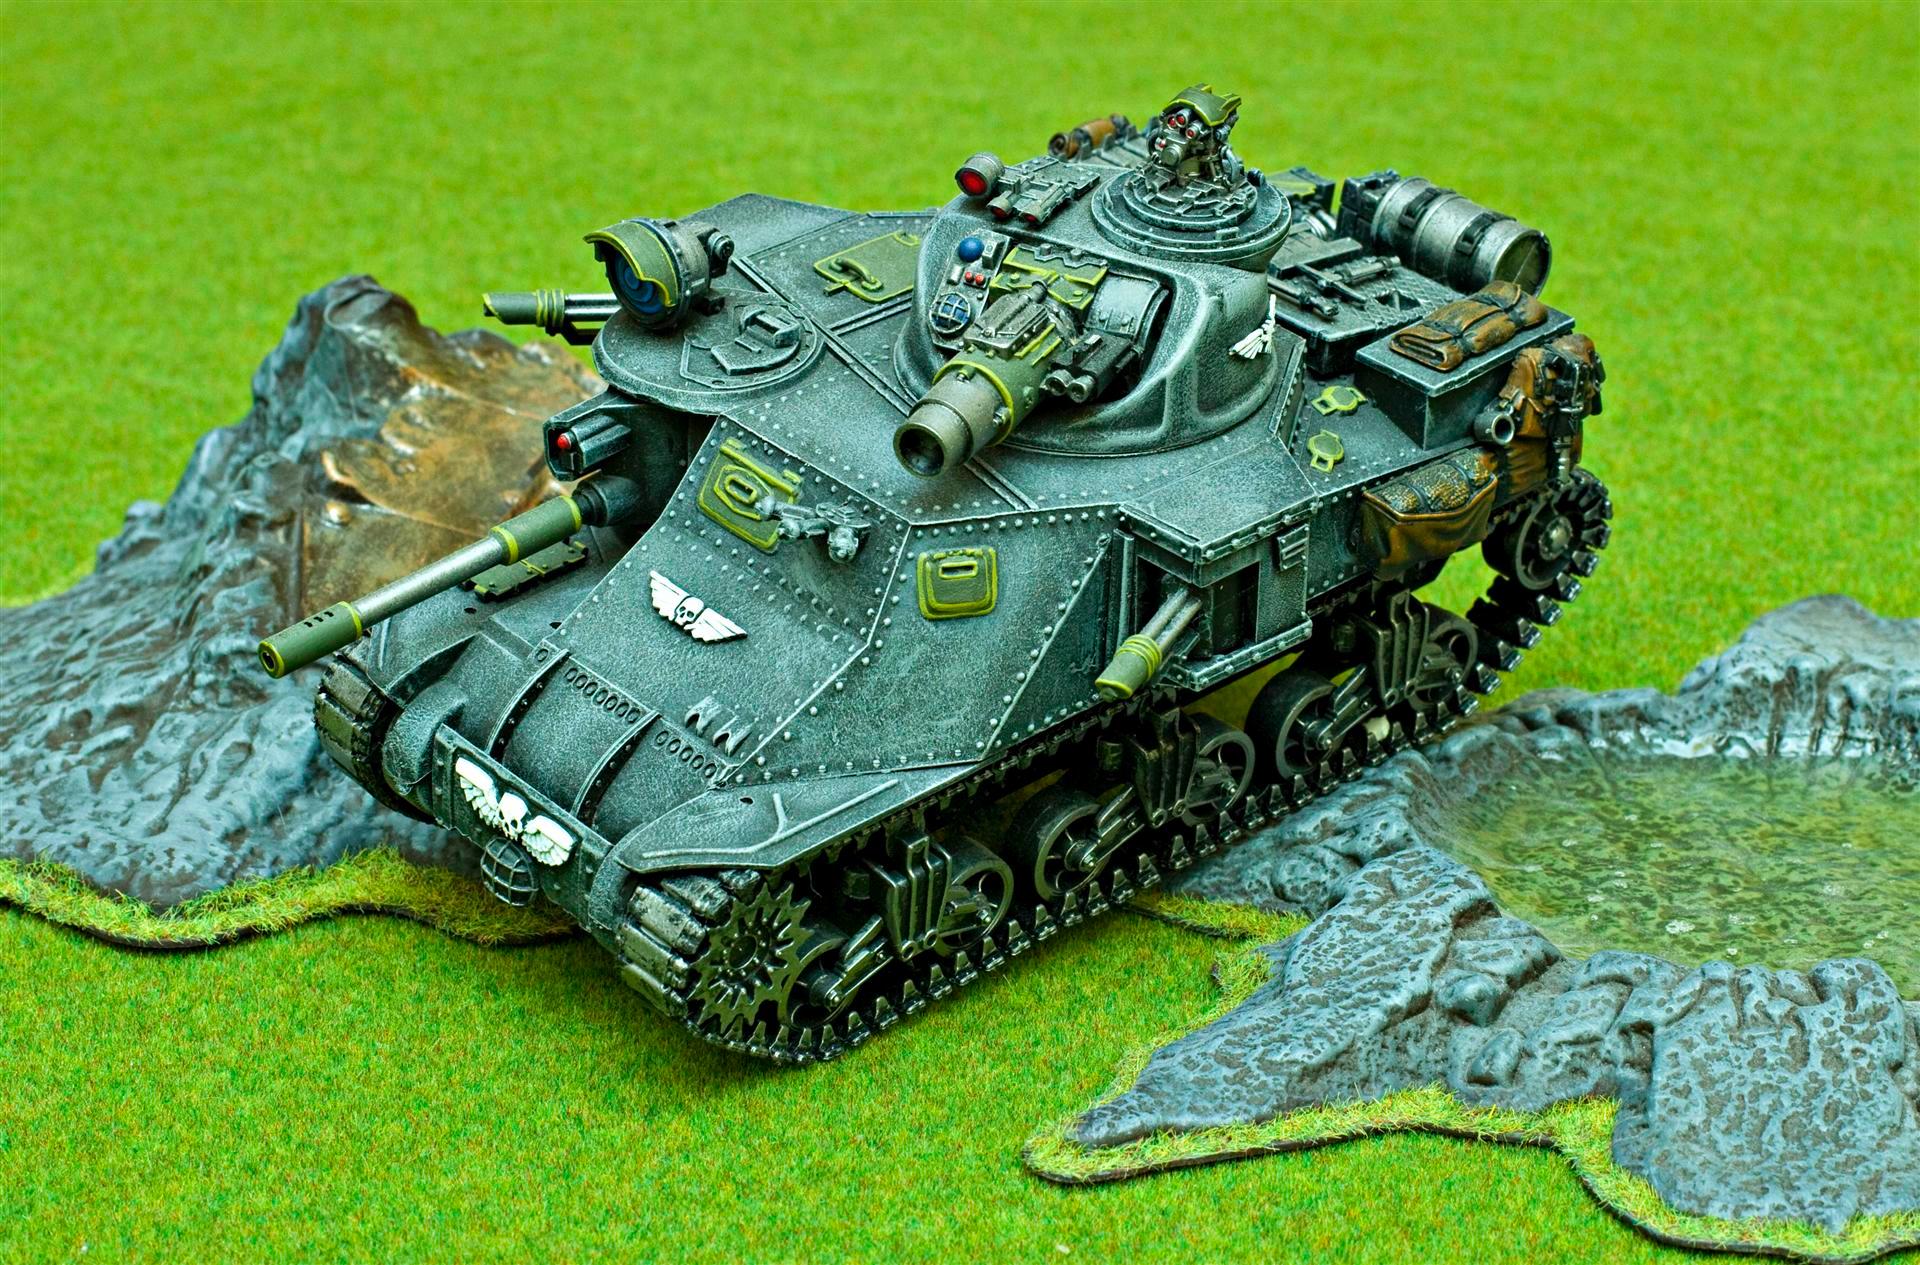 Apocalypse, Army, Astra Militarum, Autocannon, Battlecannon, Conversion, Count As, Gaming Mat, Green, Grey, Guard, Imperial, Imperial Guard, Imperials, Malcador, Super-heavy, Tank, Treads